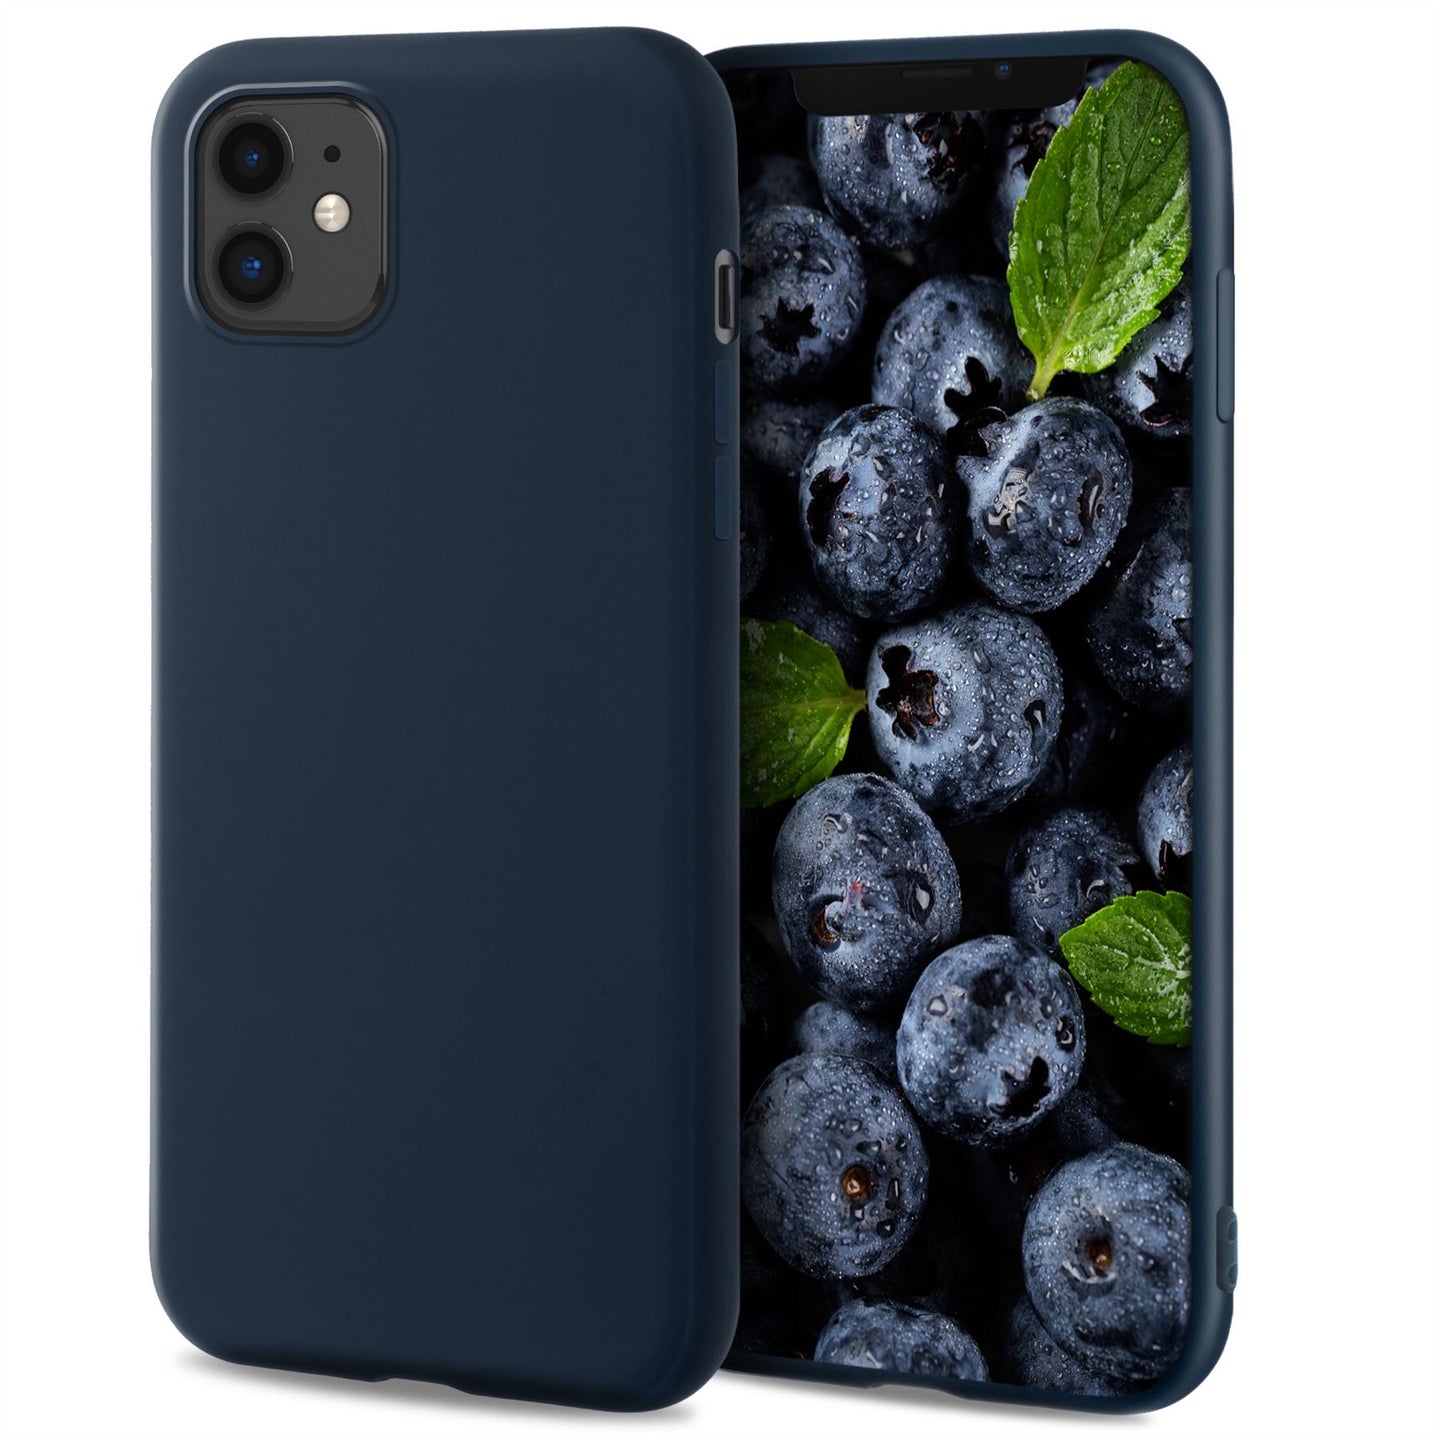 Moozy Lifestyle. Designed for iPhone 12 mini Case, Midnight Blue - Liquid Silicone Cover with Matte Finish and Soft Microfiber Lining